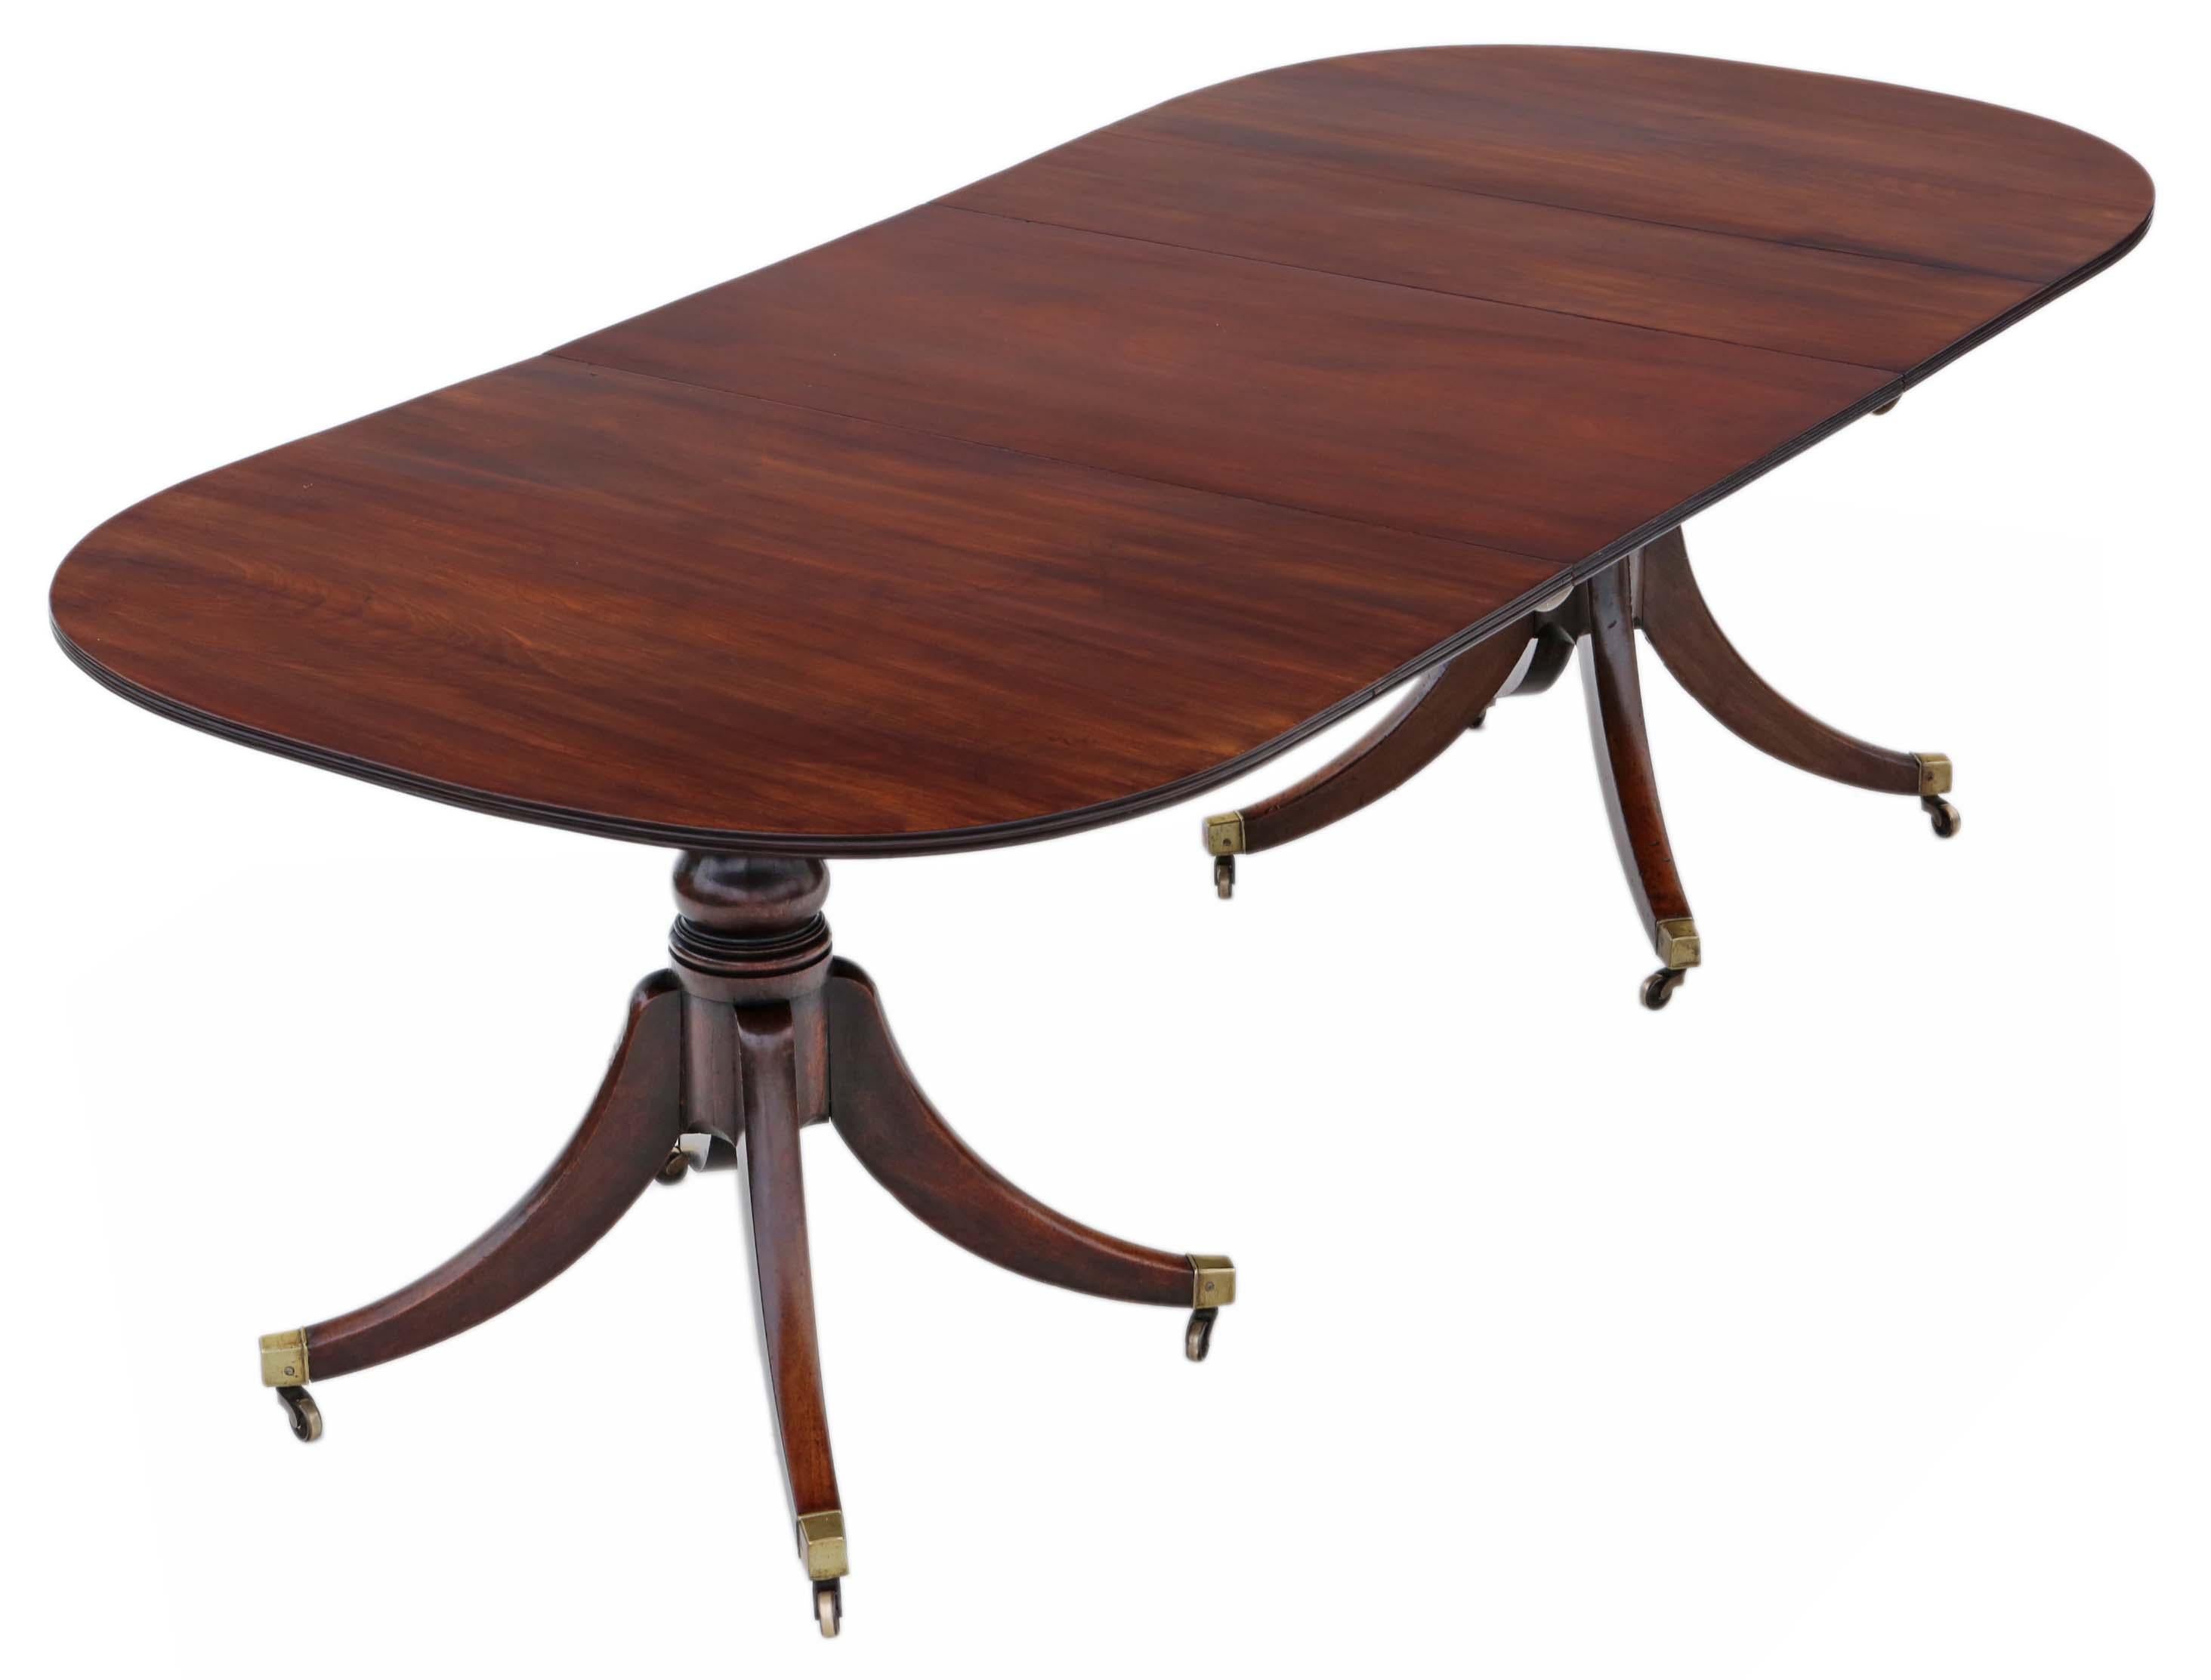 Antique large fine quality mahogany extending twin pedestal extending dining table 19th century.

The table has a lovely colour and stands on quality period brass castors. The finishes are in good order, with historic knocks, marks and